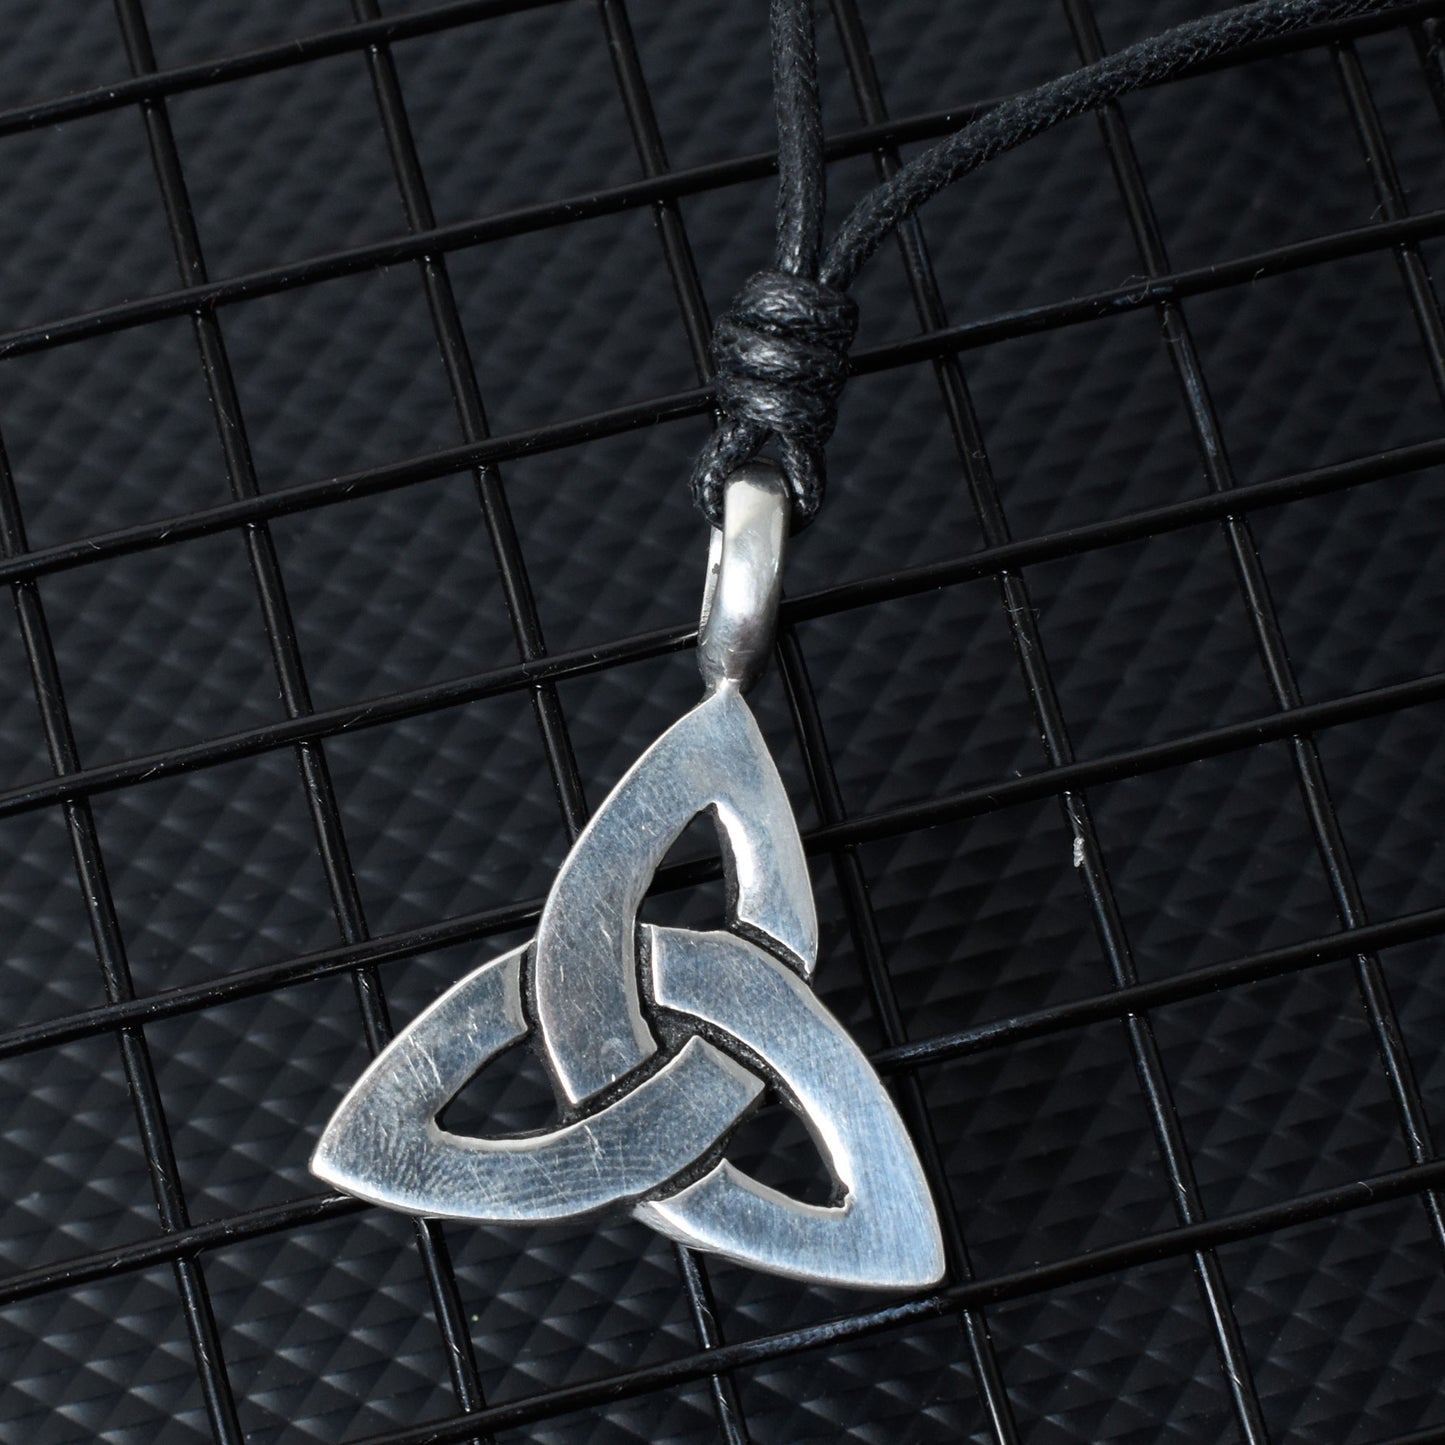 Trilogy Triquetra Silver Pewter Charm Necklace Pendant Jewelry